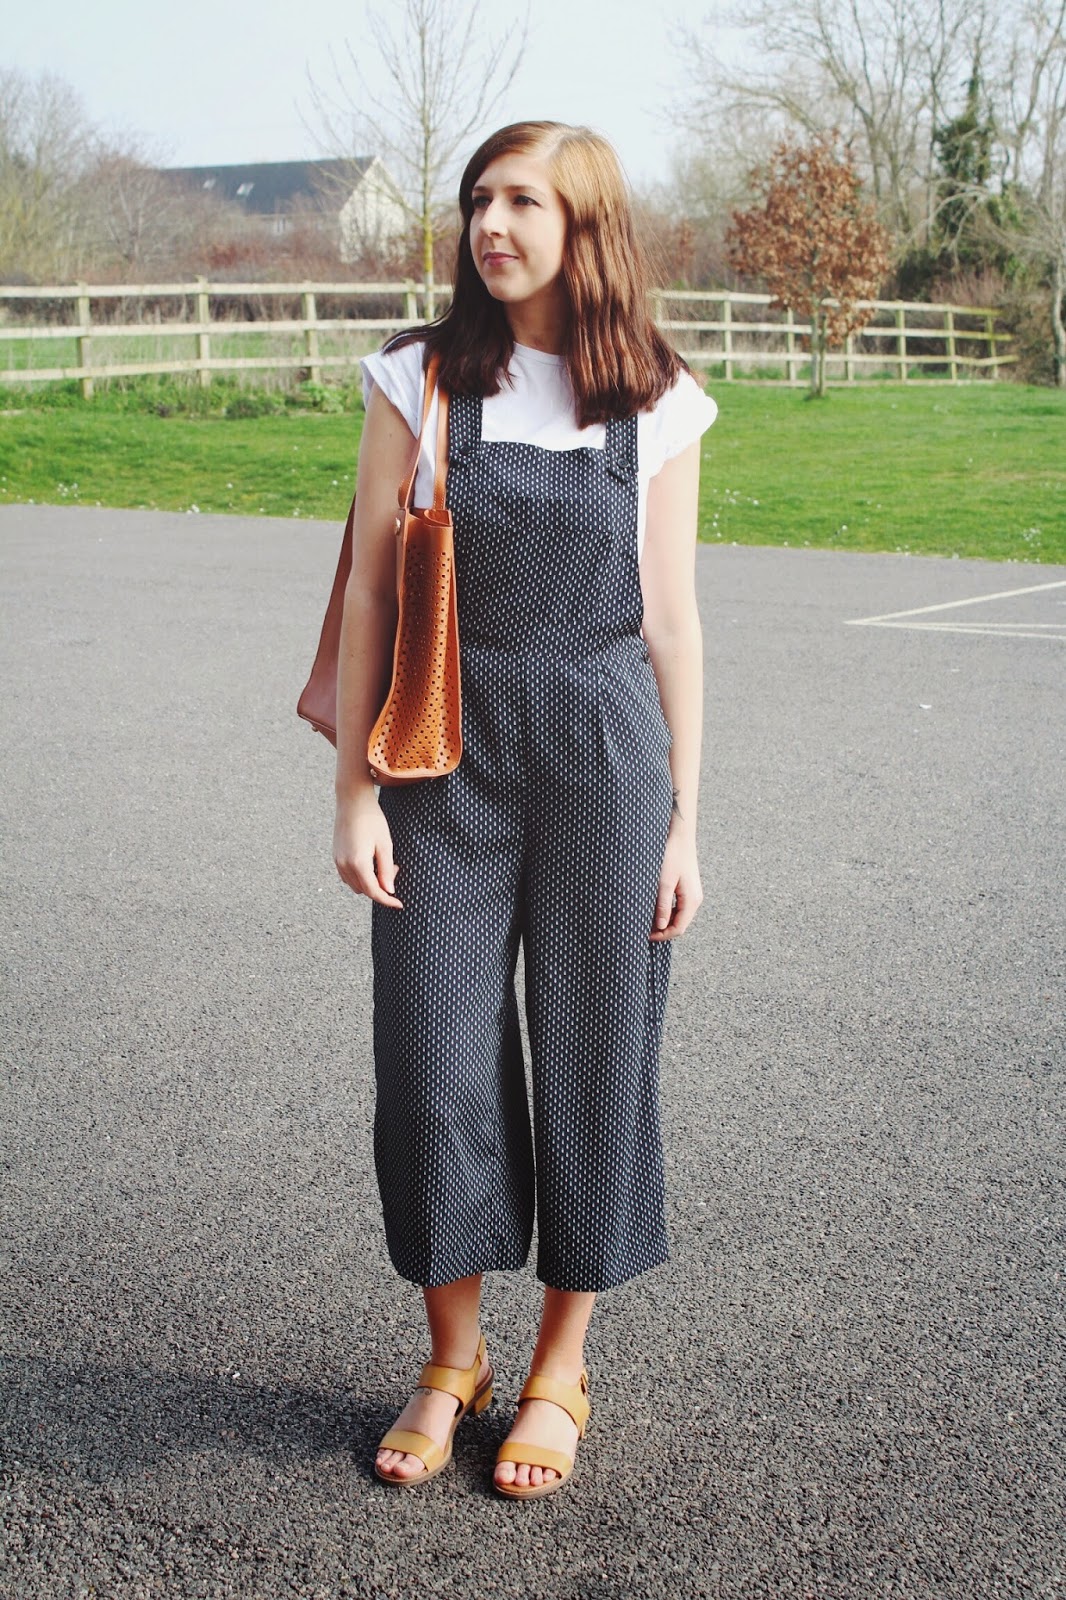 asseenonme, asos, wiw, whatimwearing, lotd, lookoftheday, ootd, outfitoftheday, halcyonvelvet, fbloggers, fblogger, fashionbloggers, fashionblogger, H&M, primark, culottes, dungarees, summerfashion